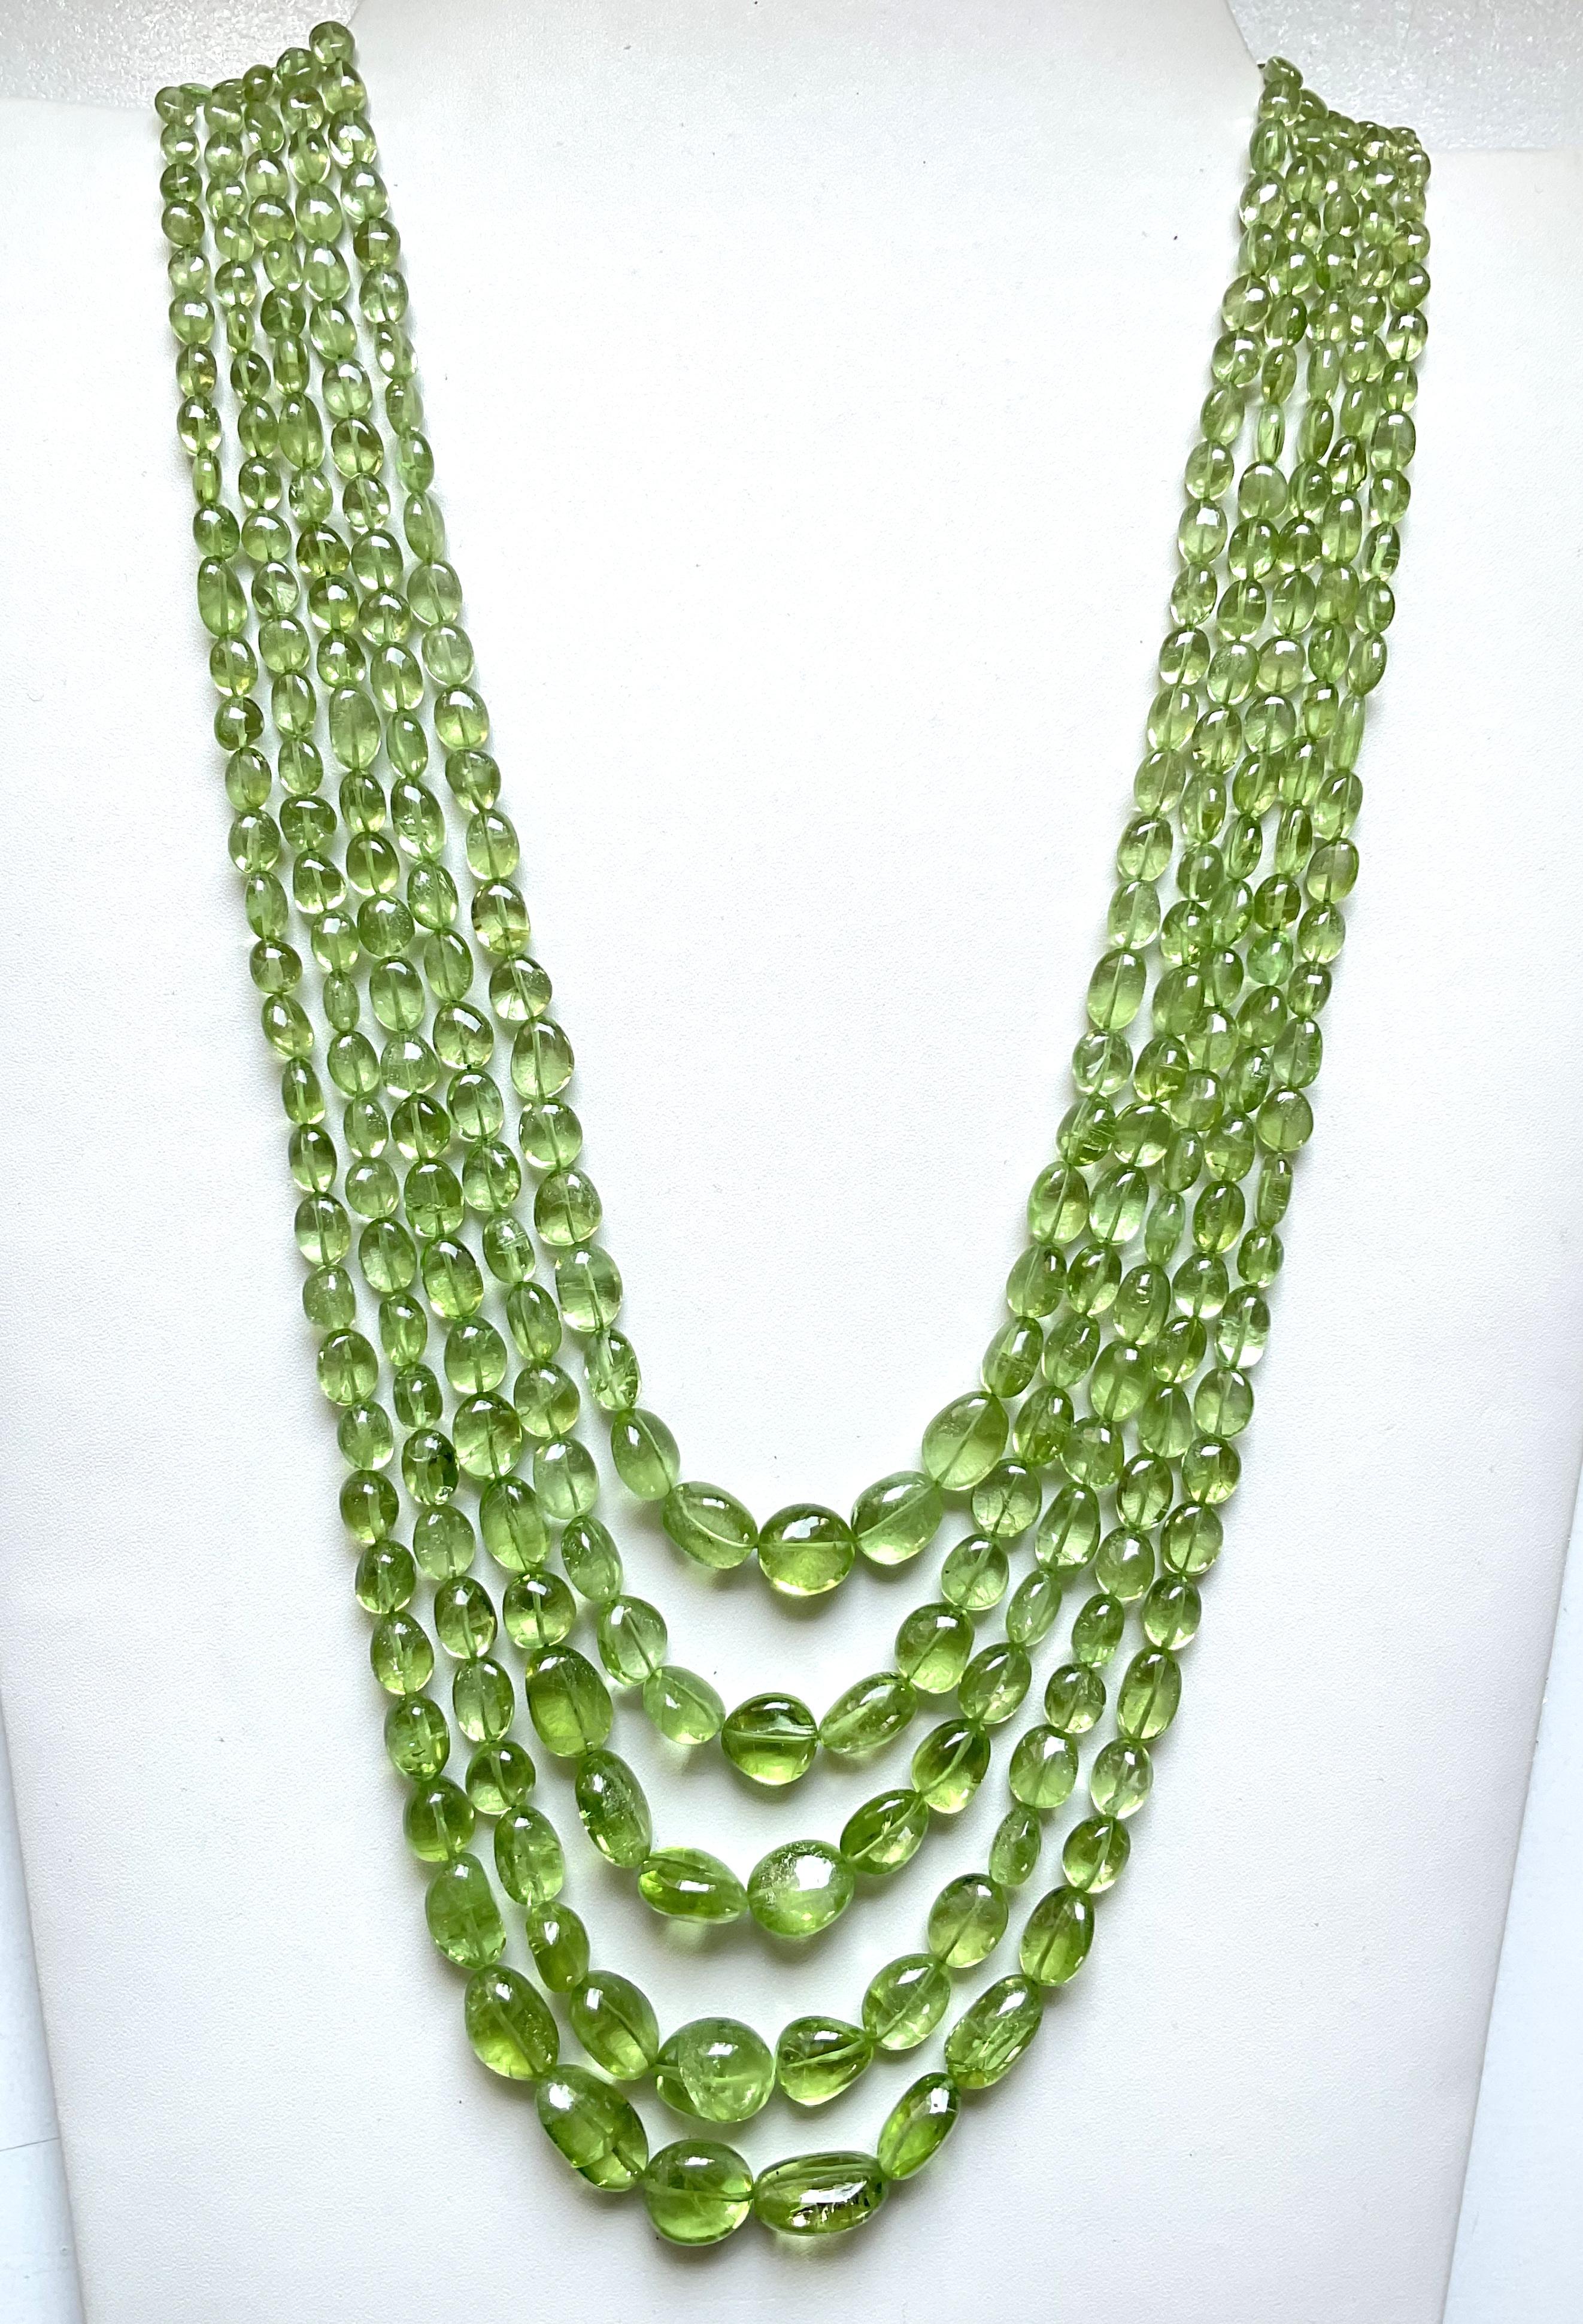 Tumbled 839.05 carats apple green peridot top quality plain tumbled natural necklace gem For Sale